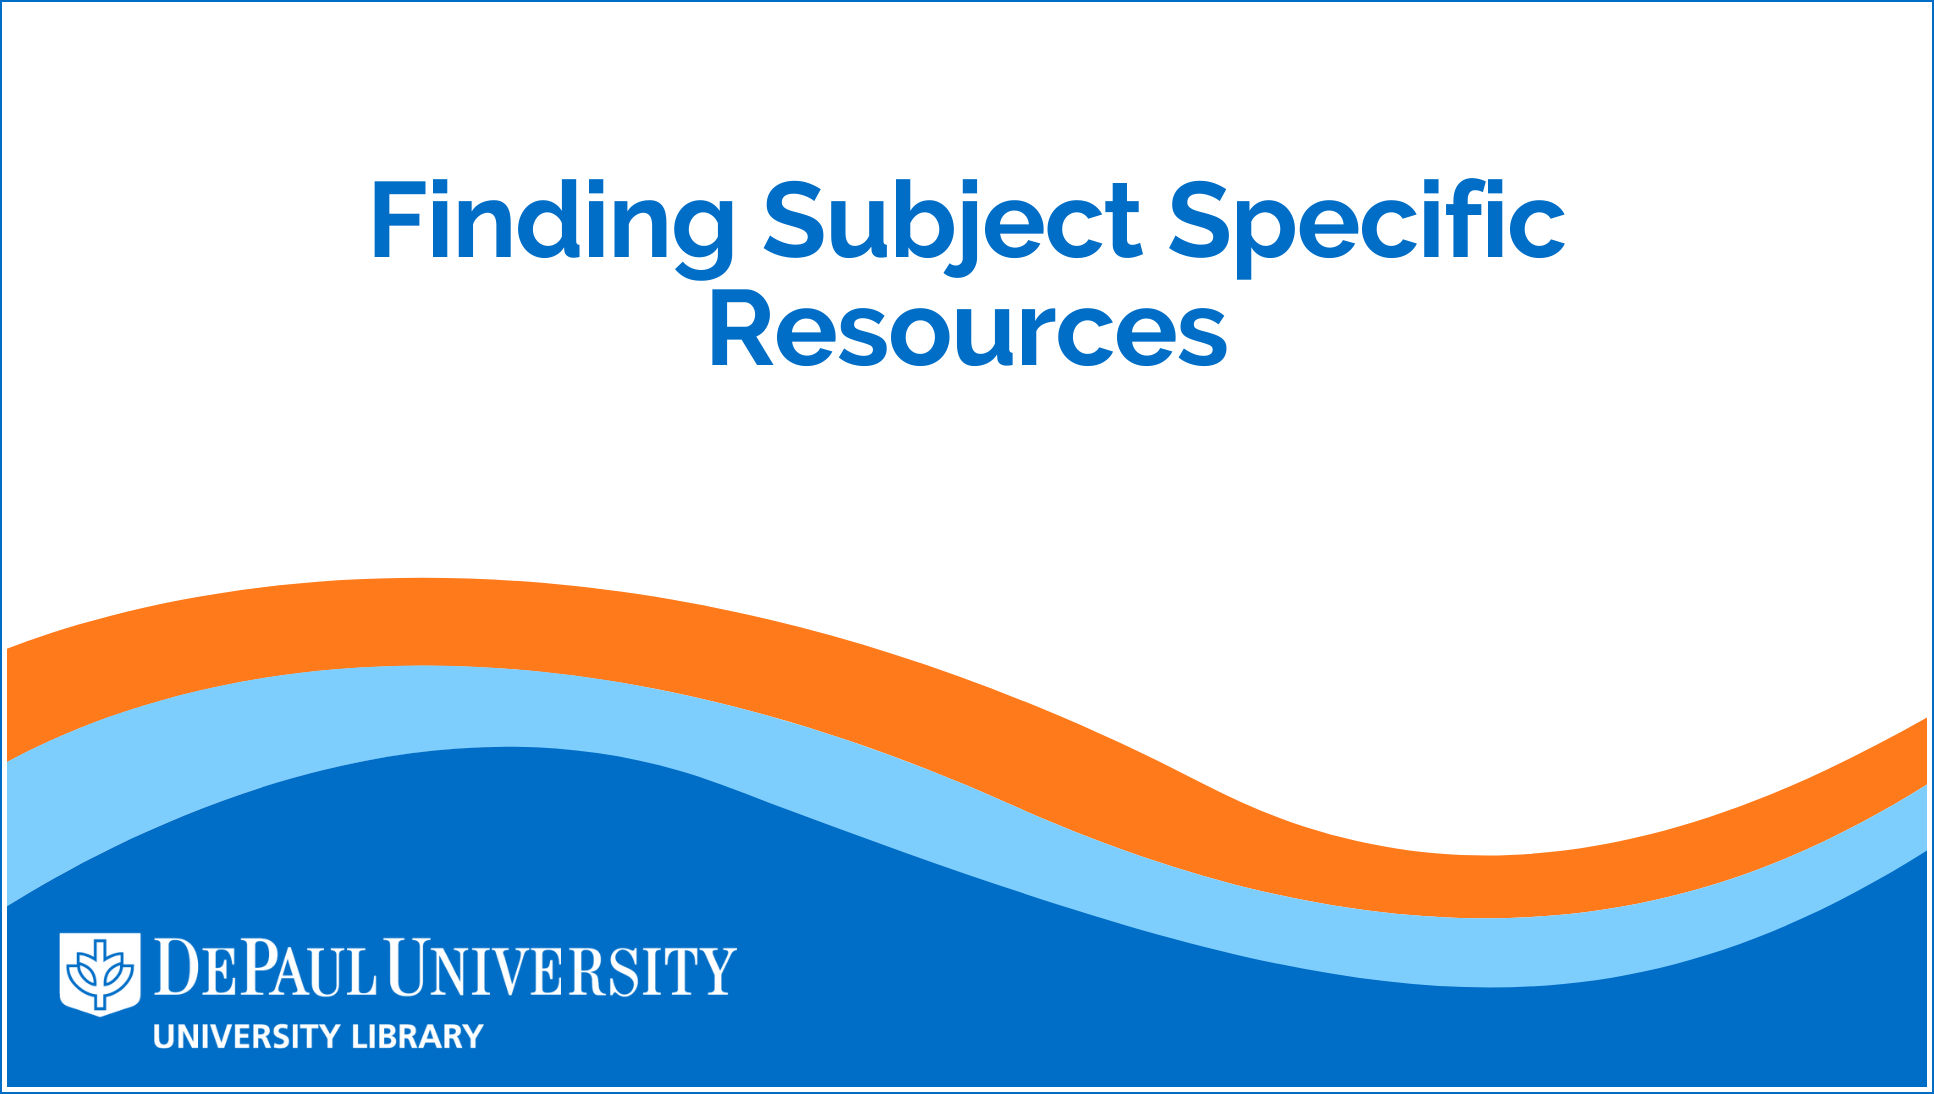 Finding Subject Specific Resources